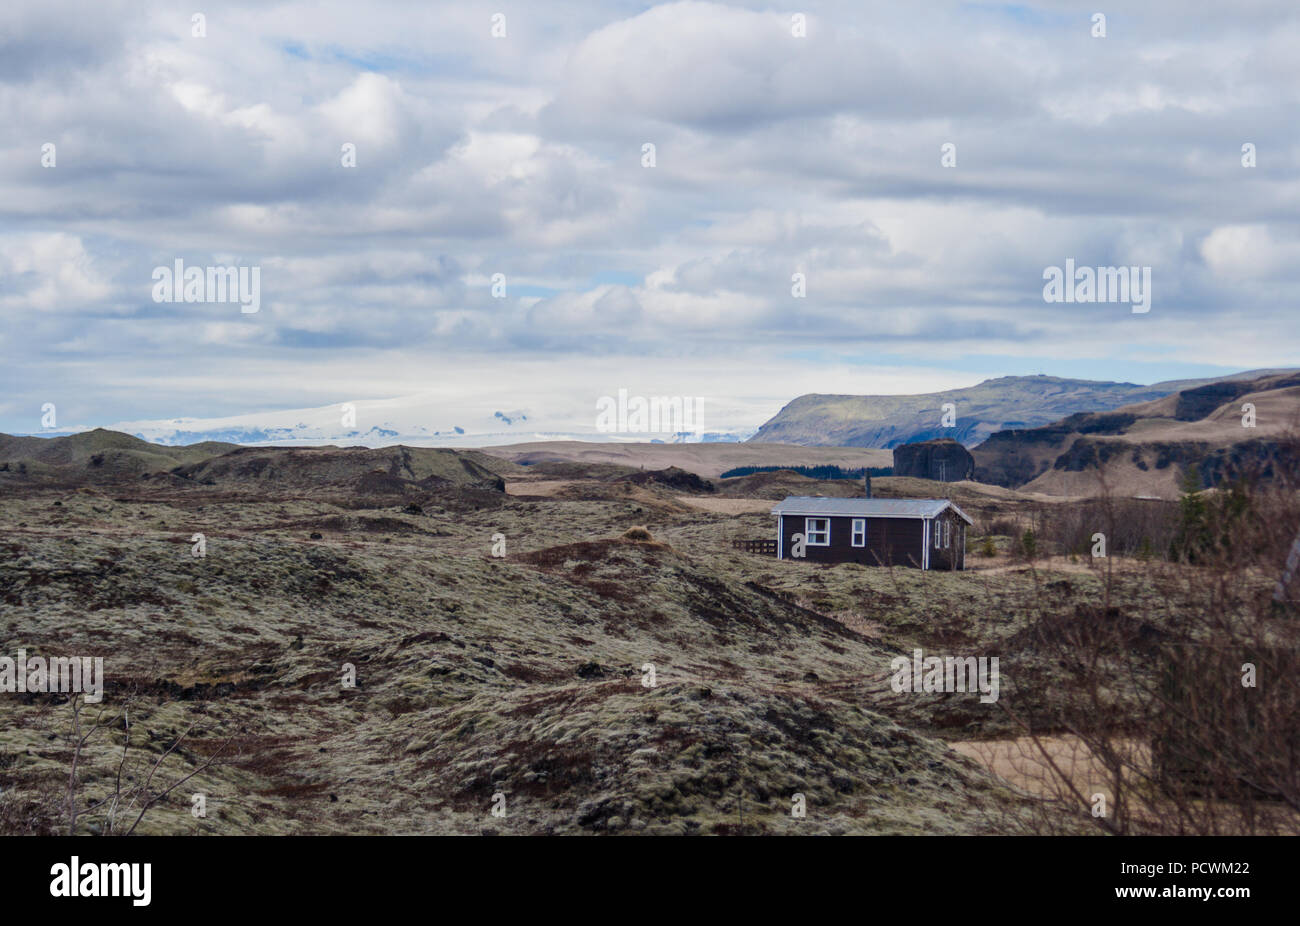 Iceland nature landscape. Small village, rocks, moss and water Stock Photo